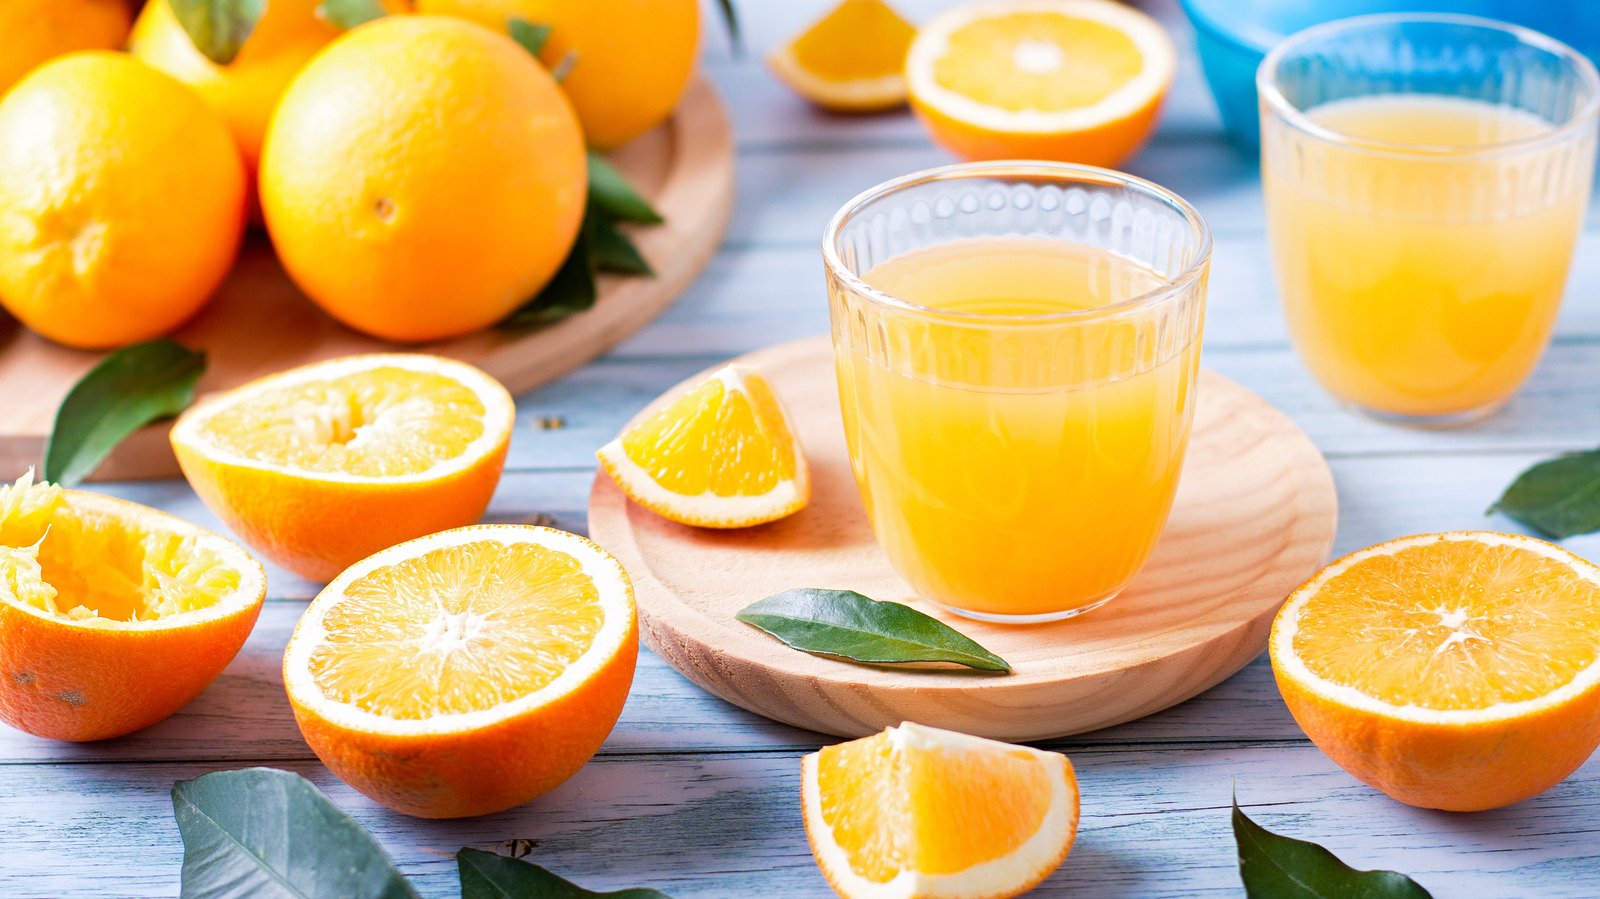 The Price Of Orange Juice May Be About To Skyrocket. Here's Why - Tasting Table